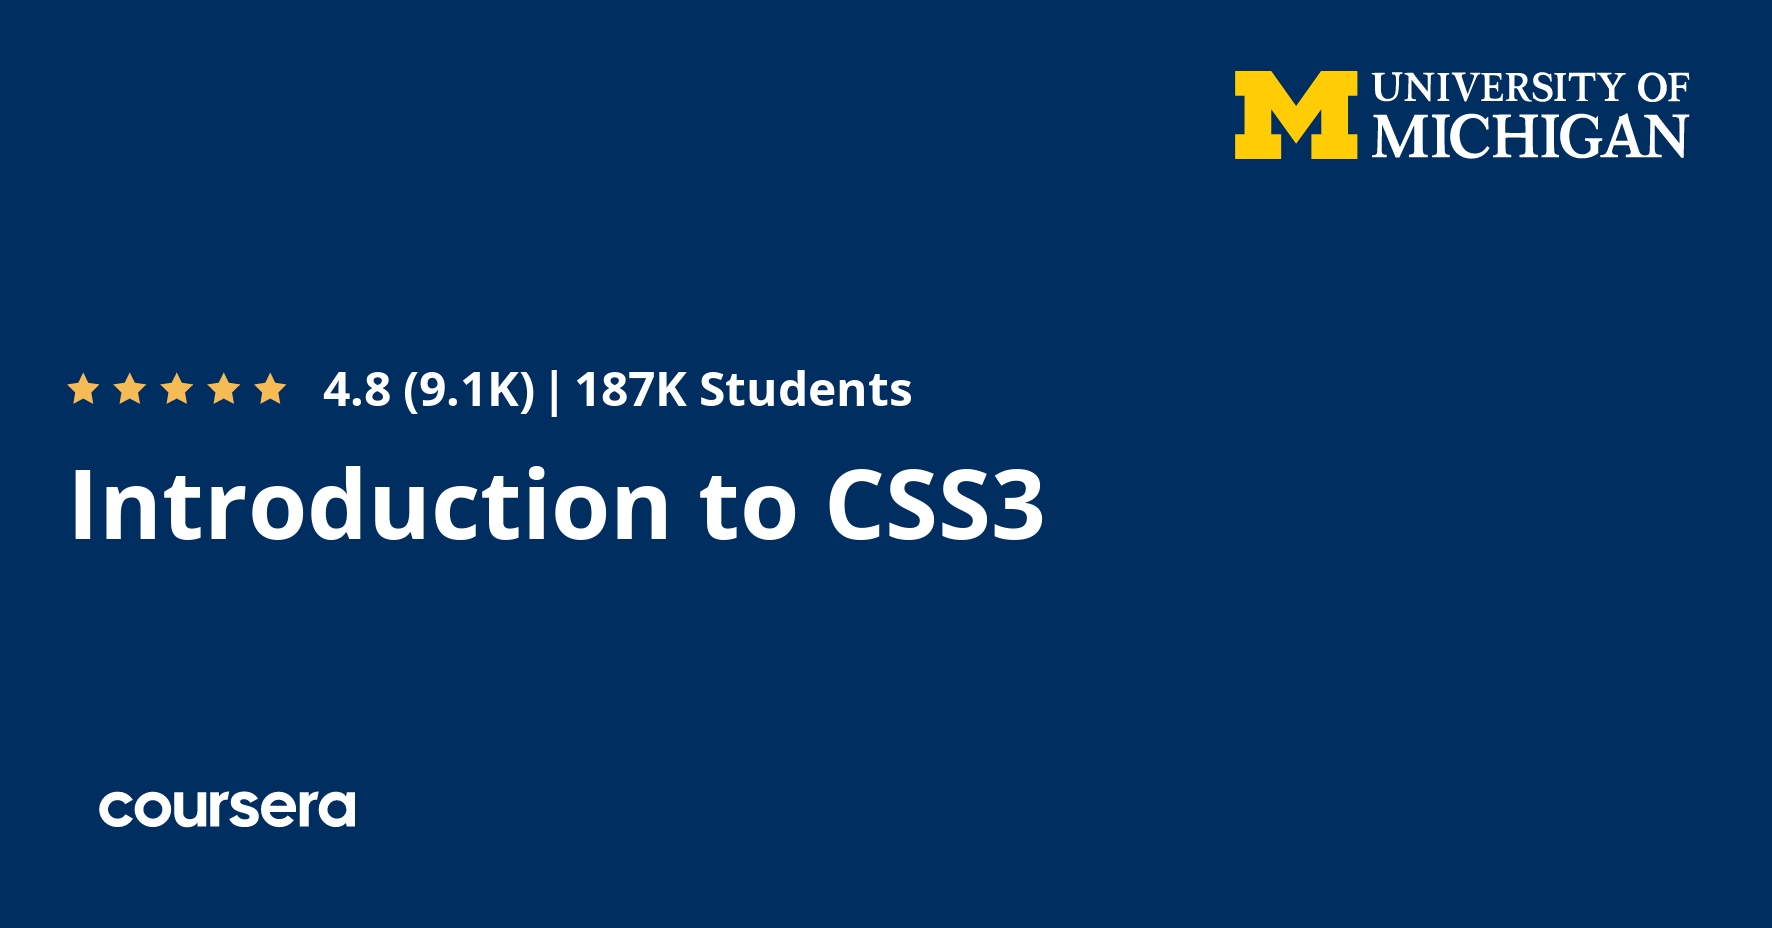 coursera introduction to css3 week 2 assignment